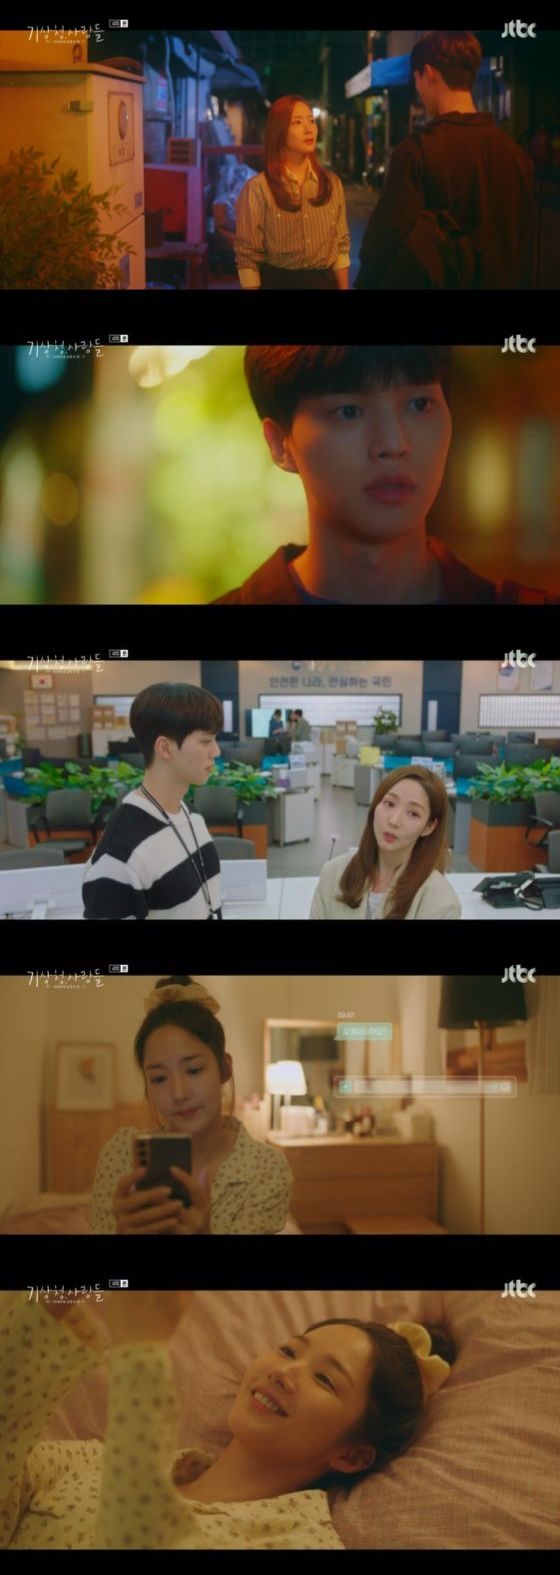 In the JTBC Saturday drama People in the Weather Service: A Cruelty of In-house Love, which aired on Tuesday afternoon, Jin Ha-kyung (Park Min-young) was portrayed after Lee Si-woos Confessions.Jin Ha-kyung said to Lee Si-woos straight-line Confessions, The general manager and the special officer are the boss and subordinates in the Meteorological Agency.When Lee Si-woo caught up again, Jin Ha Kyung refused, saying, Do you want me to do it again?Lee Si-woo persuaded Jin Ha-kyung, saying, You were shaken by me. He apologized to Jin Ha-kyung, who apologized to him, I do not apologize. I will not be sorry that you were caught by the manager.Since Confessions, Jin Ha-gyeong and Lee Si-woo have been met with differences in opinion in their work.General team staff suspected Lee Si-woos girlfriend was inside the Met Office.But I did not think that he was Jin Ha Kyung, and rather I thought Lee Si-woo was a bad boy for Jin Ha Kyung.Jin Ha-kyung was worried about the text to Lee Si-woo after work, and smiled while watching profile photos.Then suddenly the video call button was pressed, and Jin Ha-kyung tried to hide his embarrassment and gave Lee Si-woo a lot of work. Lee Si-woo said, Why are you so badly drawn?I wondered about Jin Ha-gyeongs attitude.Jin Ha-kyung said, It is not effective and it is difficult to secure equipment with the current budget. However, Chae Yoo-jin said, So it is due to lack of budget and lack of equipment.I do not do it, he said, asking provocative questions and writing an article that snipers the incompetence of the Meteorological Agency.Jin Ha-kyung, who learned about it the next day, protested to Chae Yoo-jin, saying, The fact is distorted. Chae Yoo-jin said, What about it?I responded shamelessly, and Jin Ha-kyung suspected that he had deliberately revenged Han Ki-jun (Yoon Park) for his personal feelings, saying, Do you get a fact check from a close person? Jin Ha-gyeong used Lee Si-woos data to make the report.Then I called Lee Si-woo every five minutes, and Lee Si-woo eventually came to Jinha Kyungs house.On the other hand, Jin Ha-kyung, who received Lee Si-woos Confessions earlier, was drawn to kiss Lee Si-woo.Jin Ha Kyung and Lee Si-woo greeted the morning together and announced the start of a new in-house love.